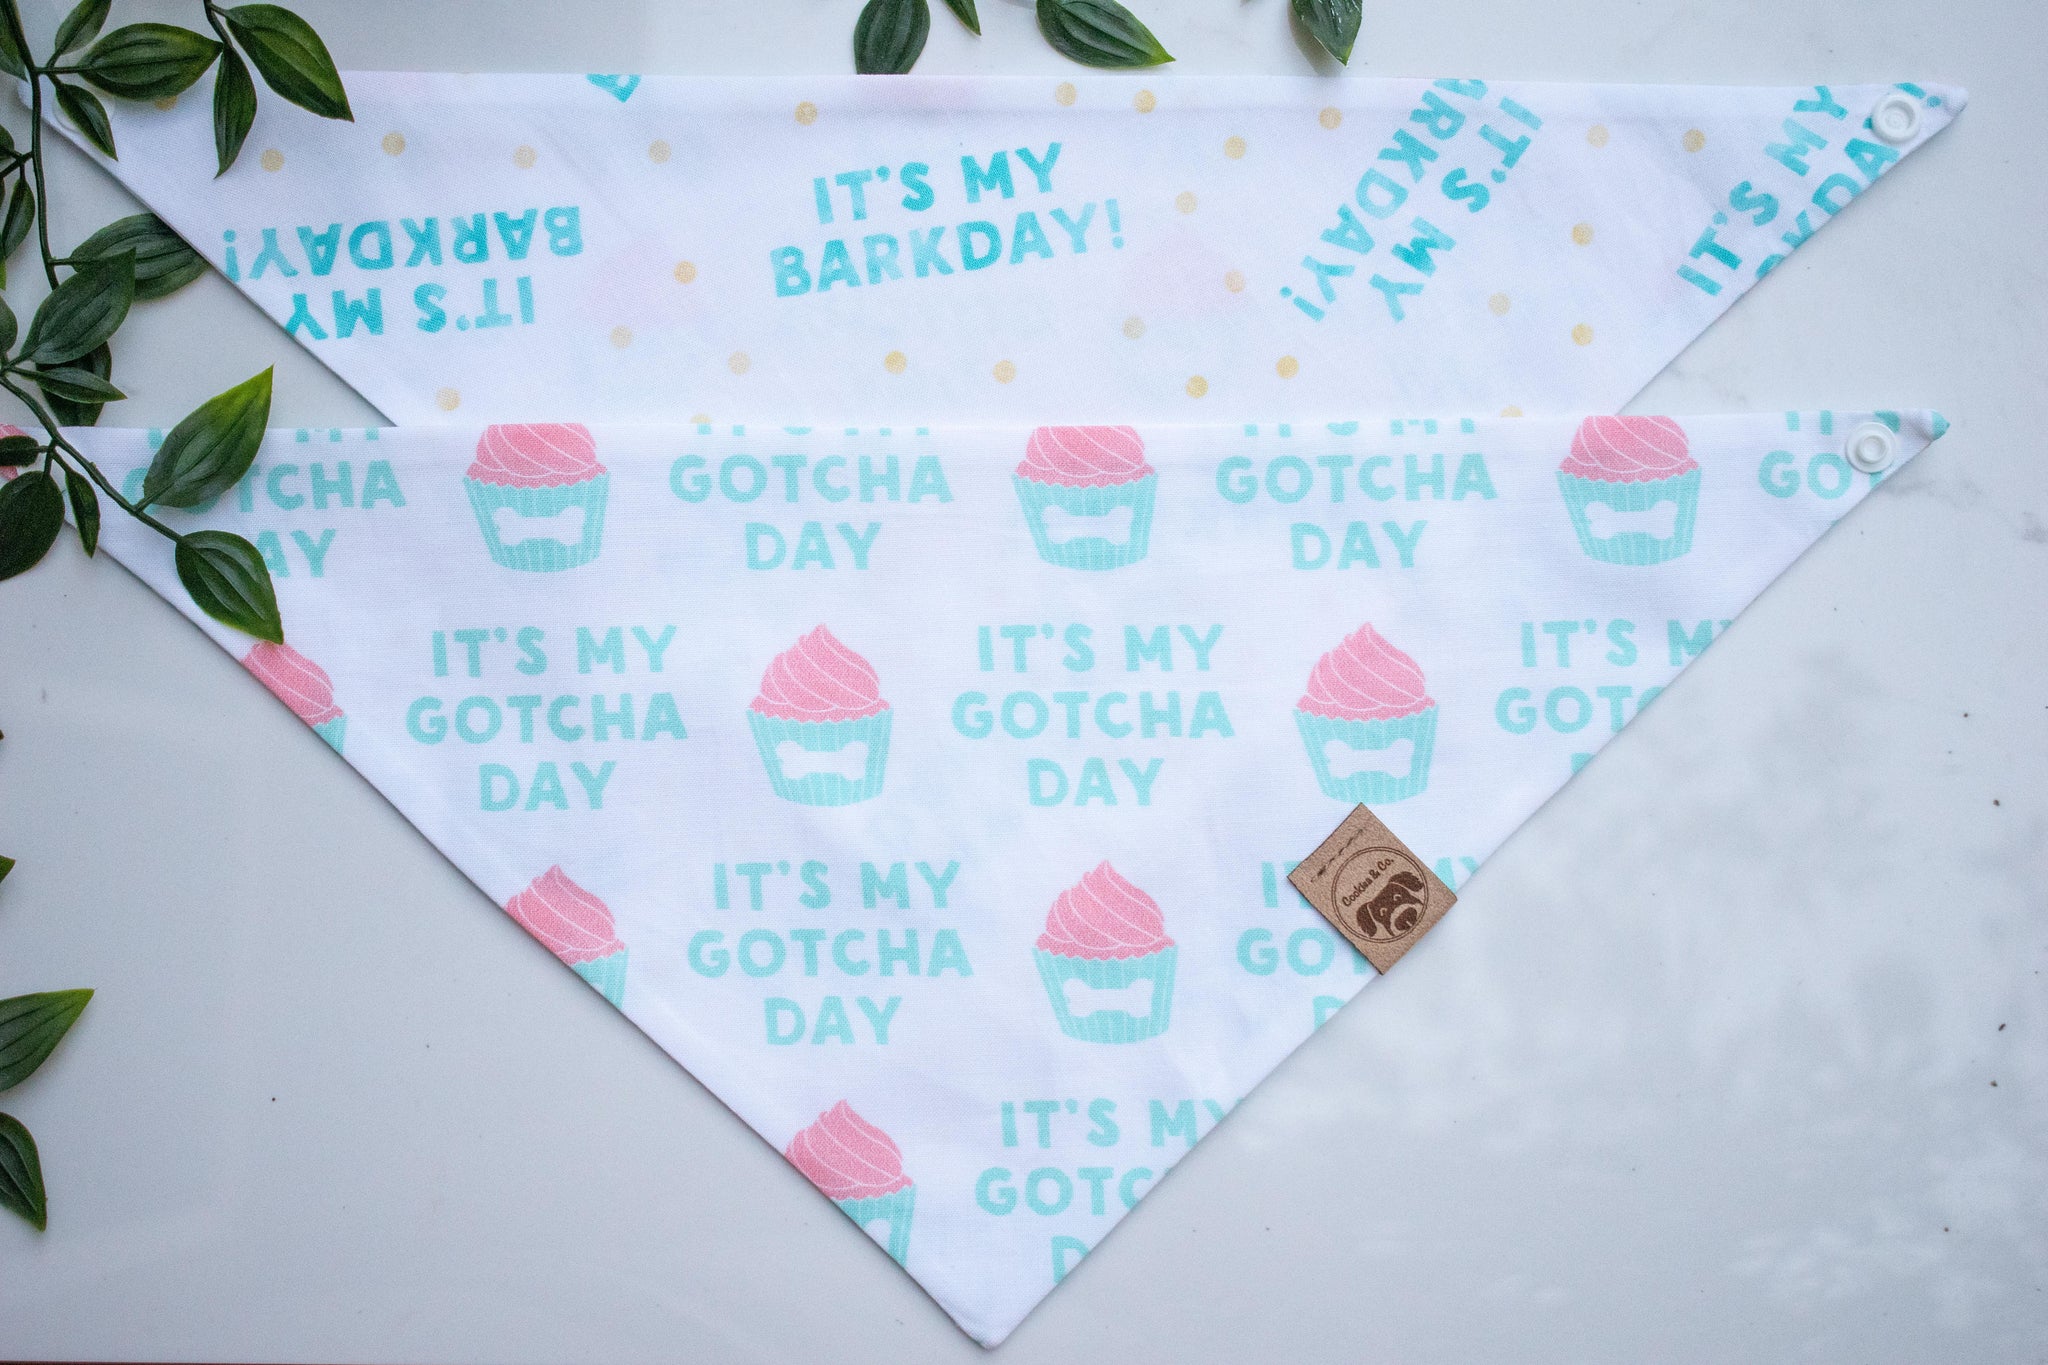 Reversible Gotcha and Barkday bandana print, with one side featuring a repeating pattern of 'Its My Gotcha Day' slogan and a pink cupcake in a light blue cupcake baking cup with a white bone icon on a white background, and the other side featuring a repeating pattern of 'Its My Barkday' slogan with yellow confetti on a white background.